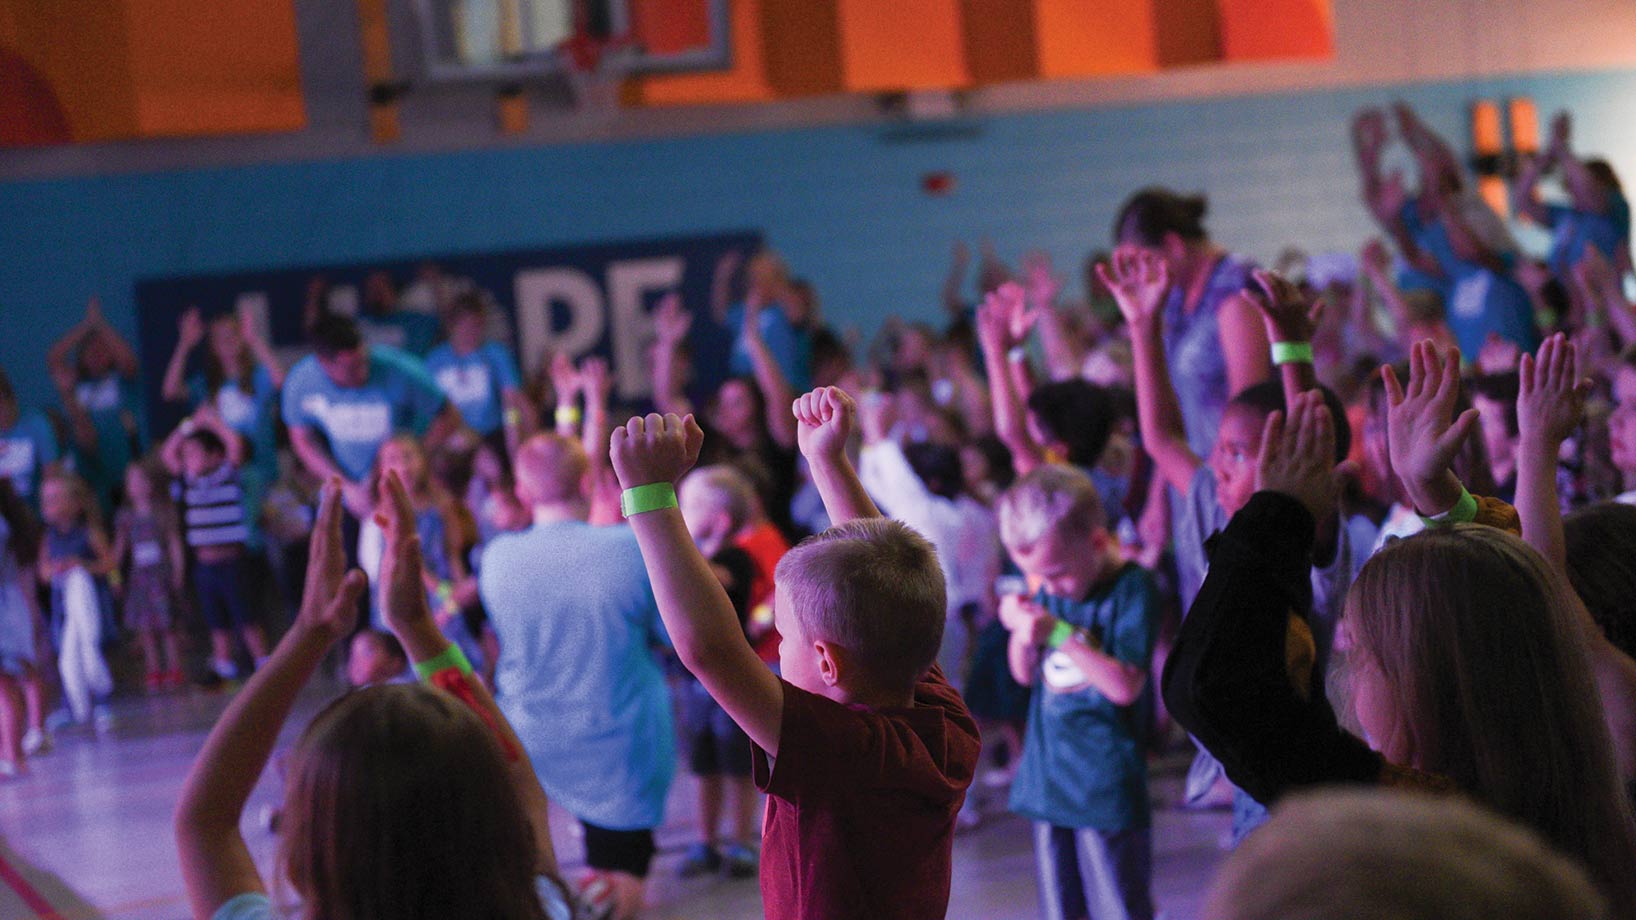 Kids with arms raised dancing in the gym with lights glowing